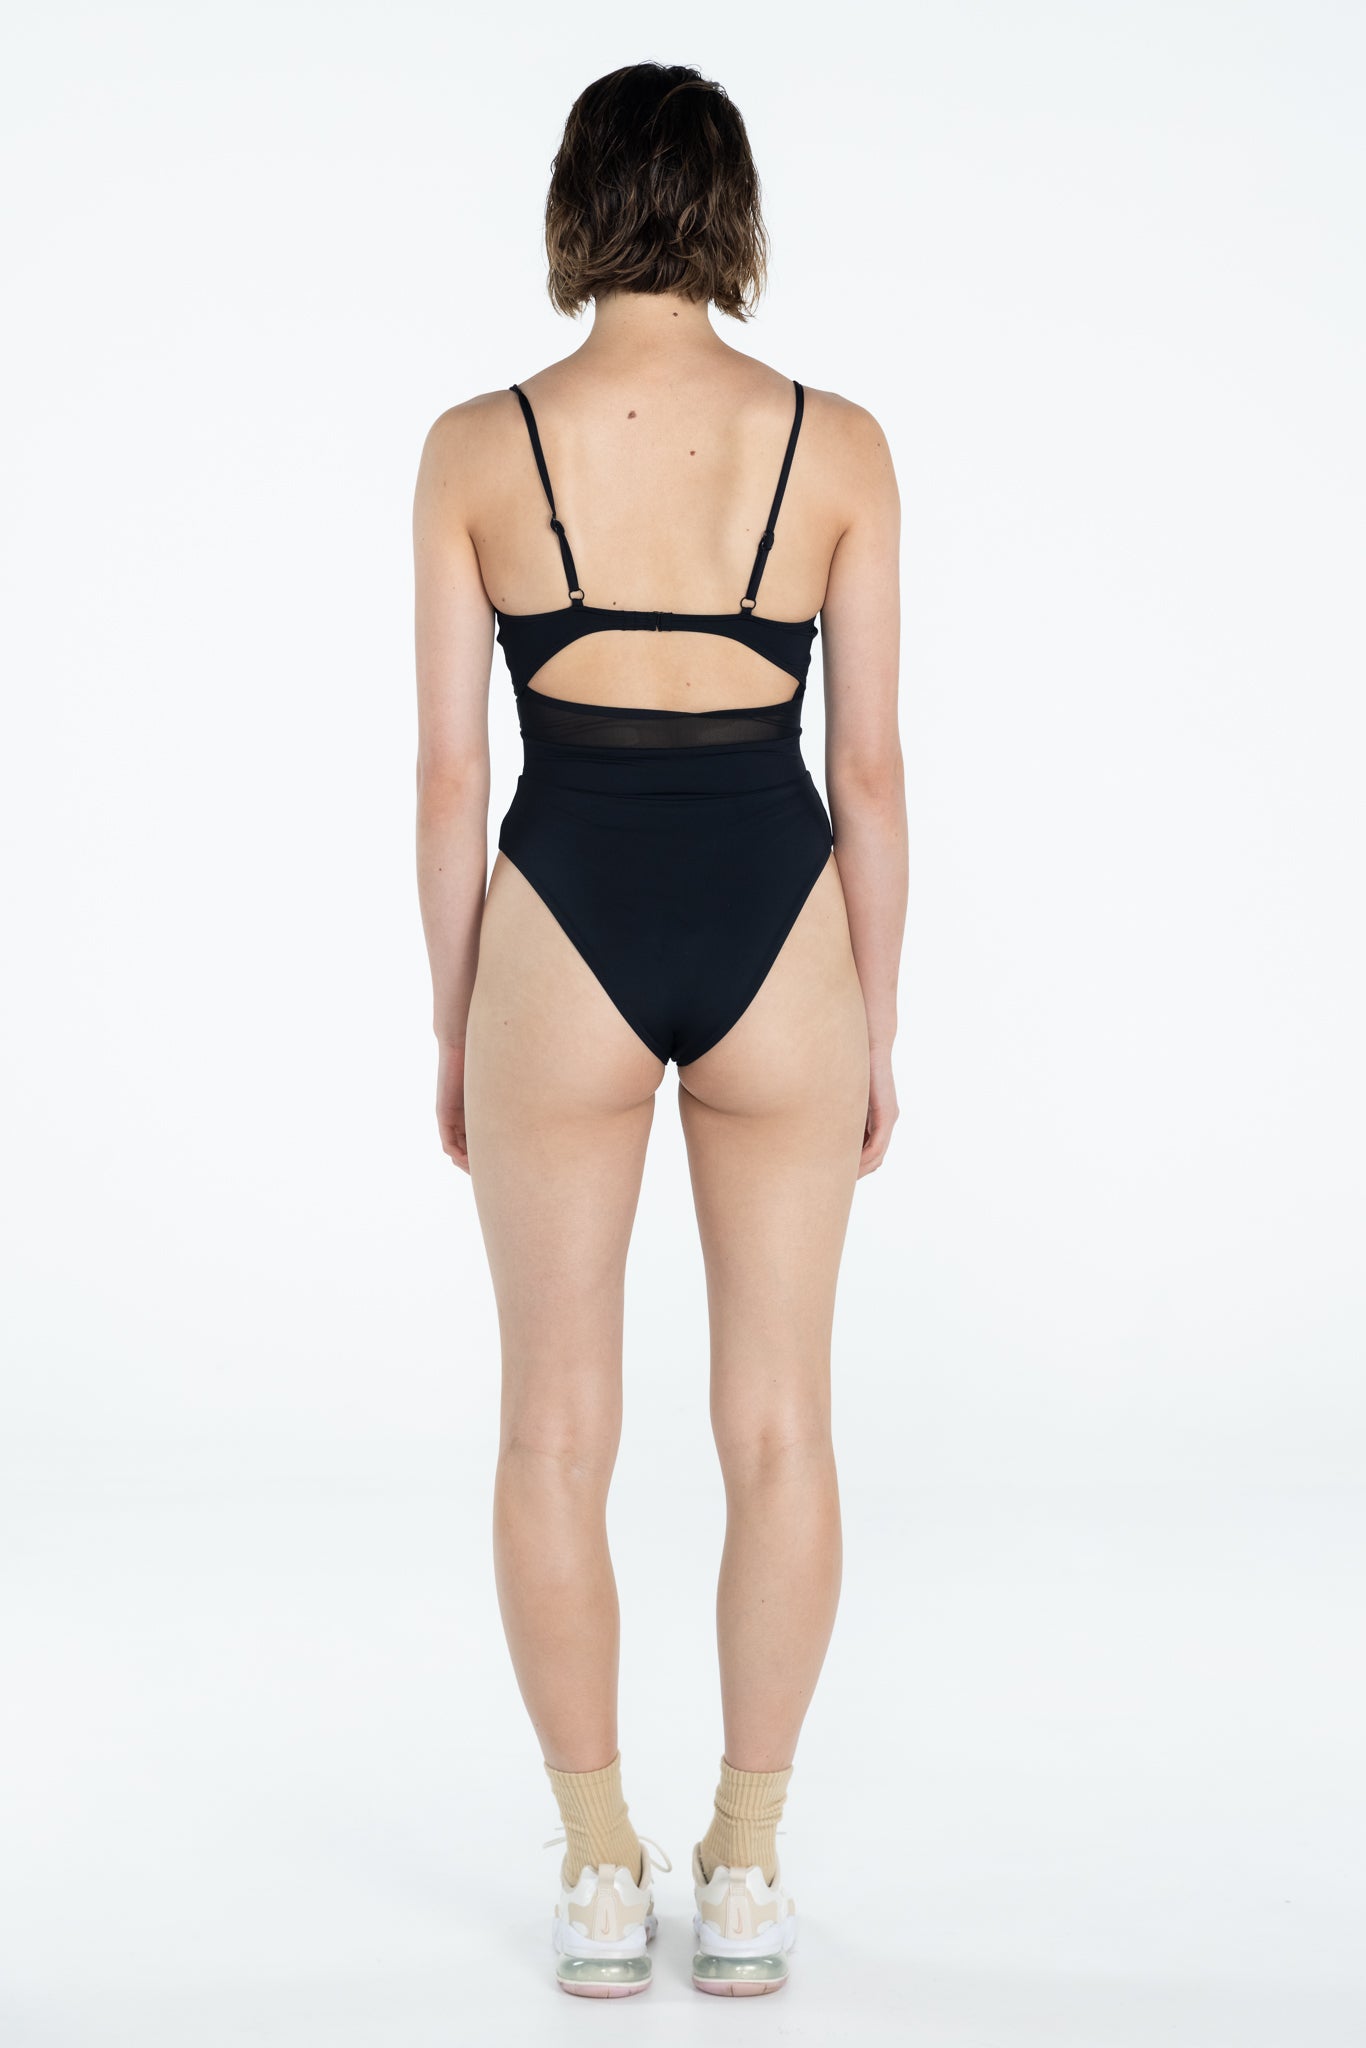 SWMR The Dip one piece swimsuit in black back view